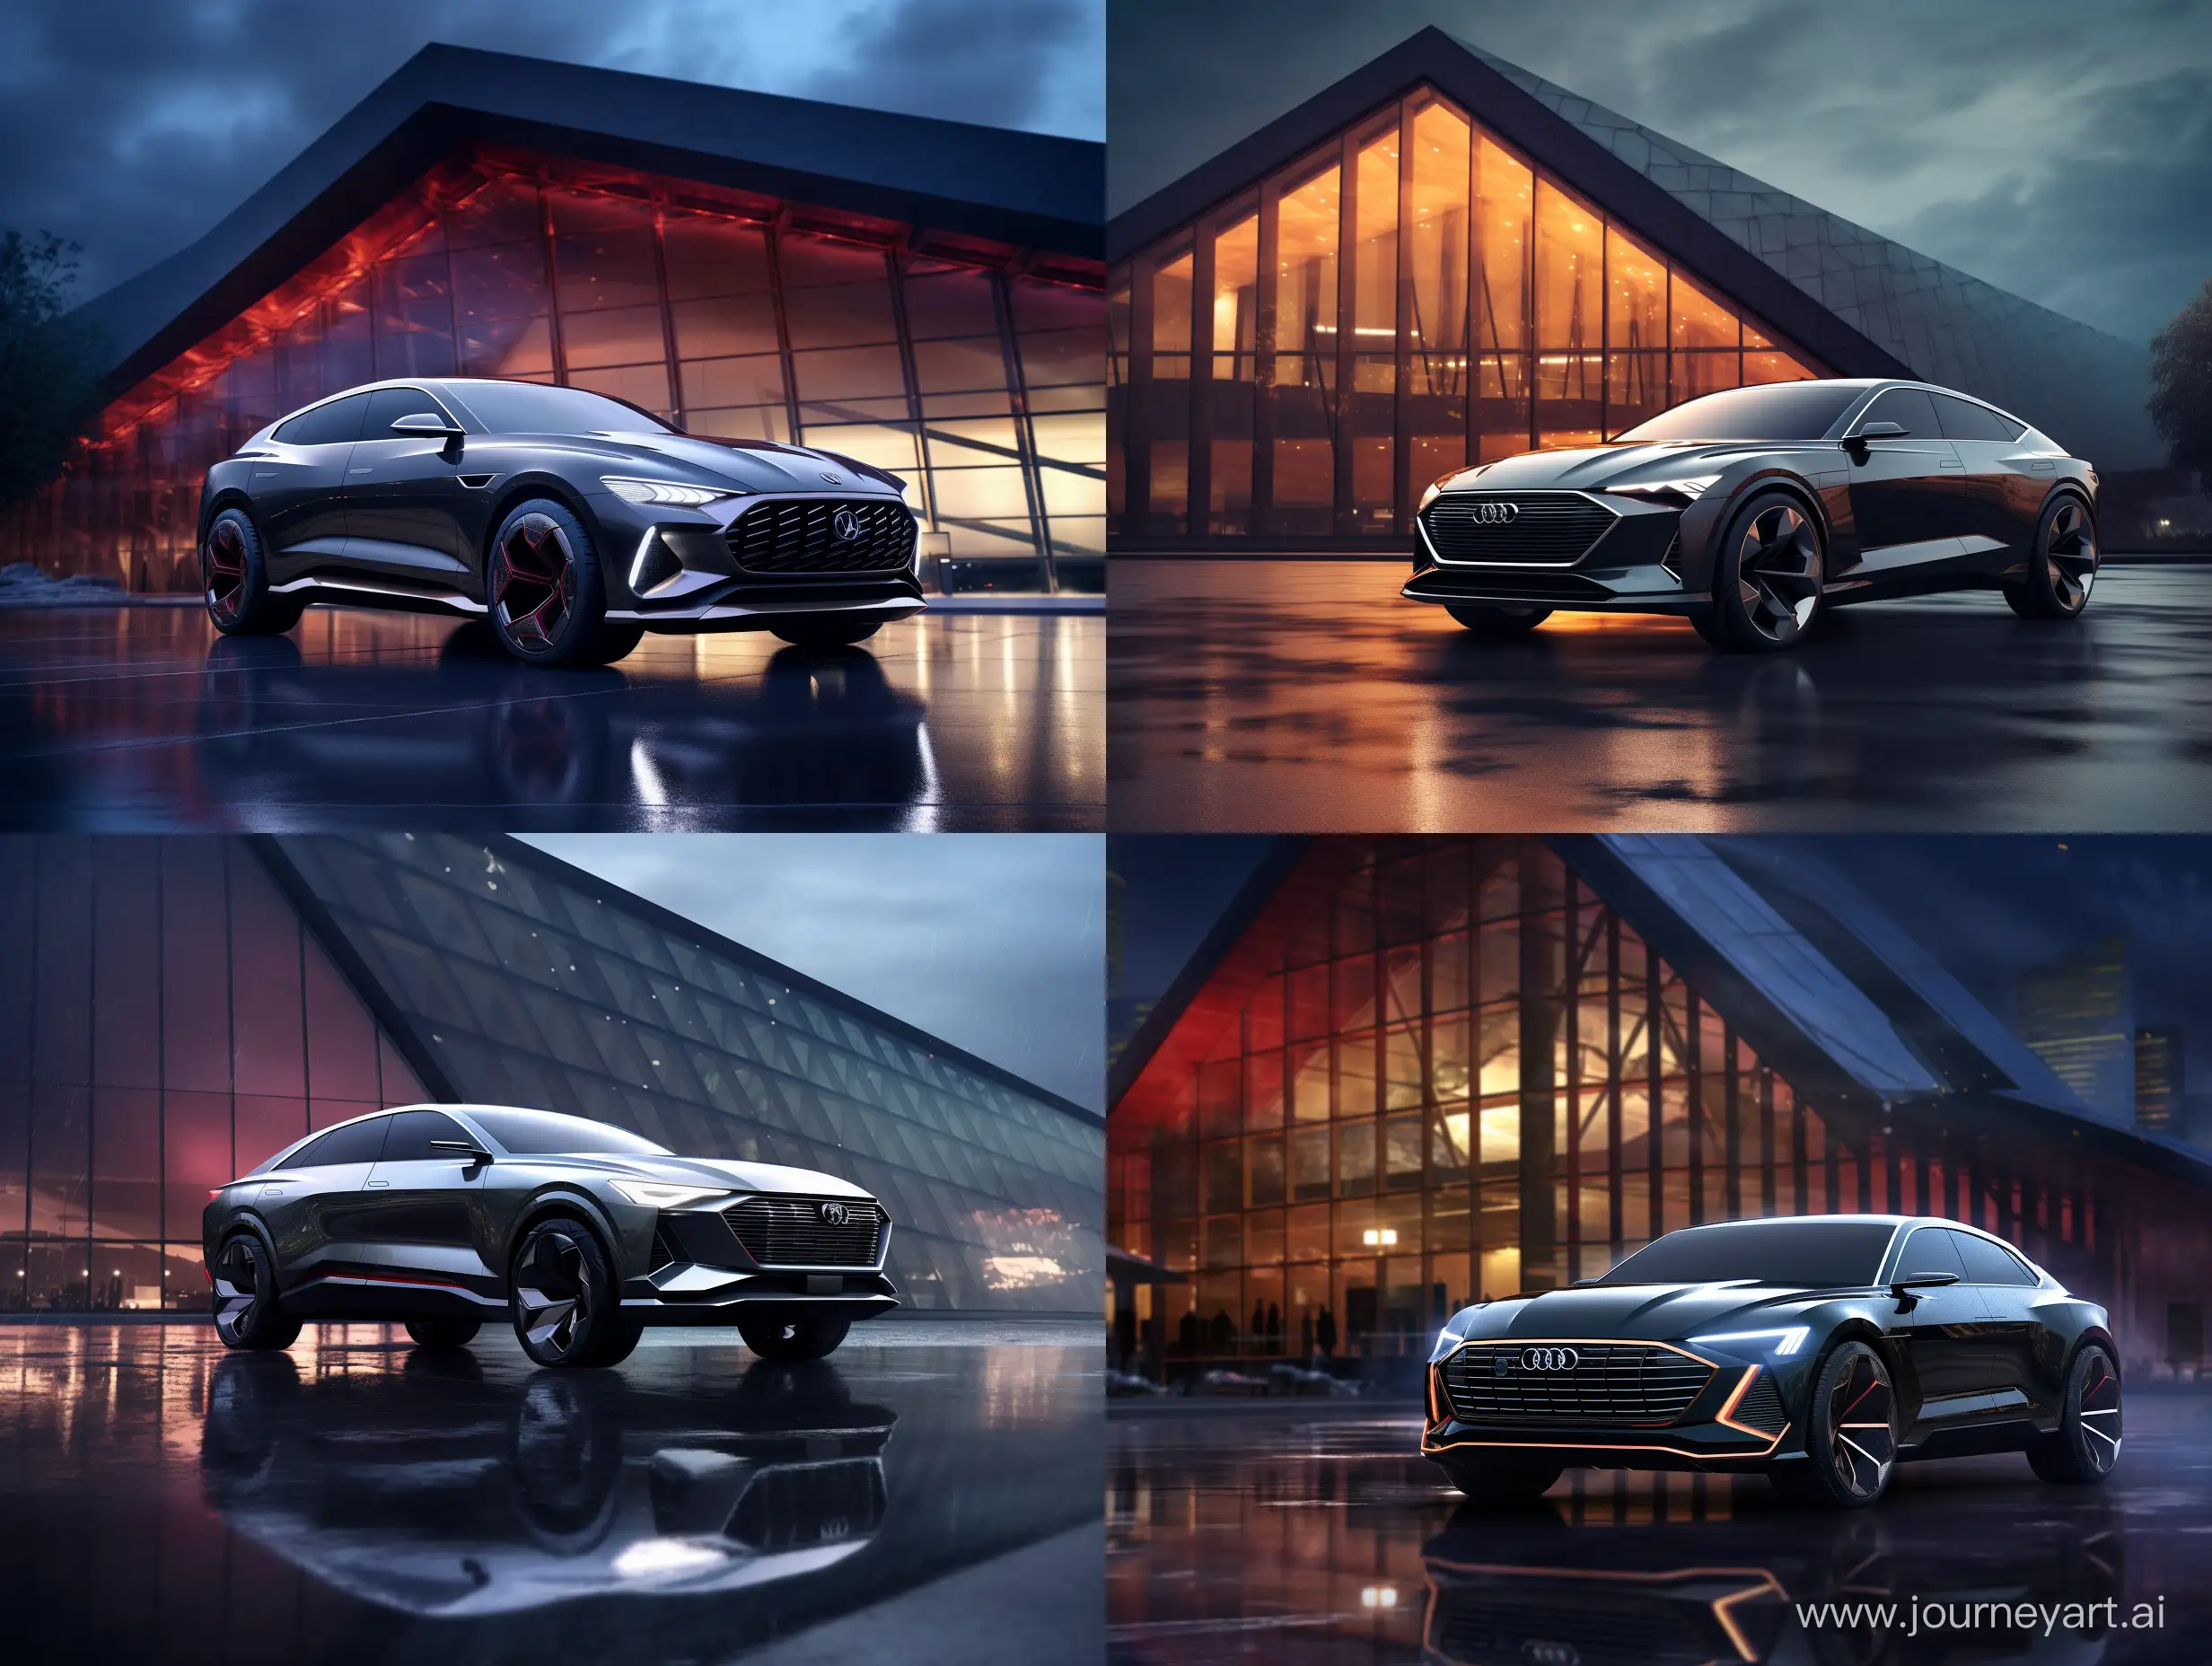 Create an audi RSQ8 in black. In front of a futuristic glass building